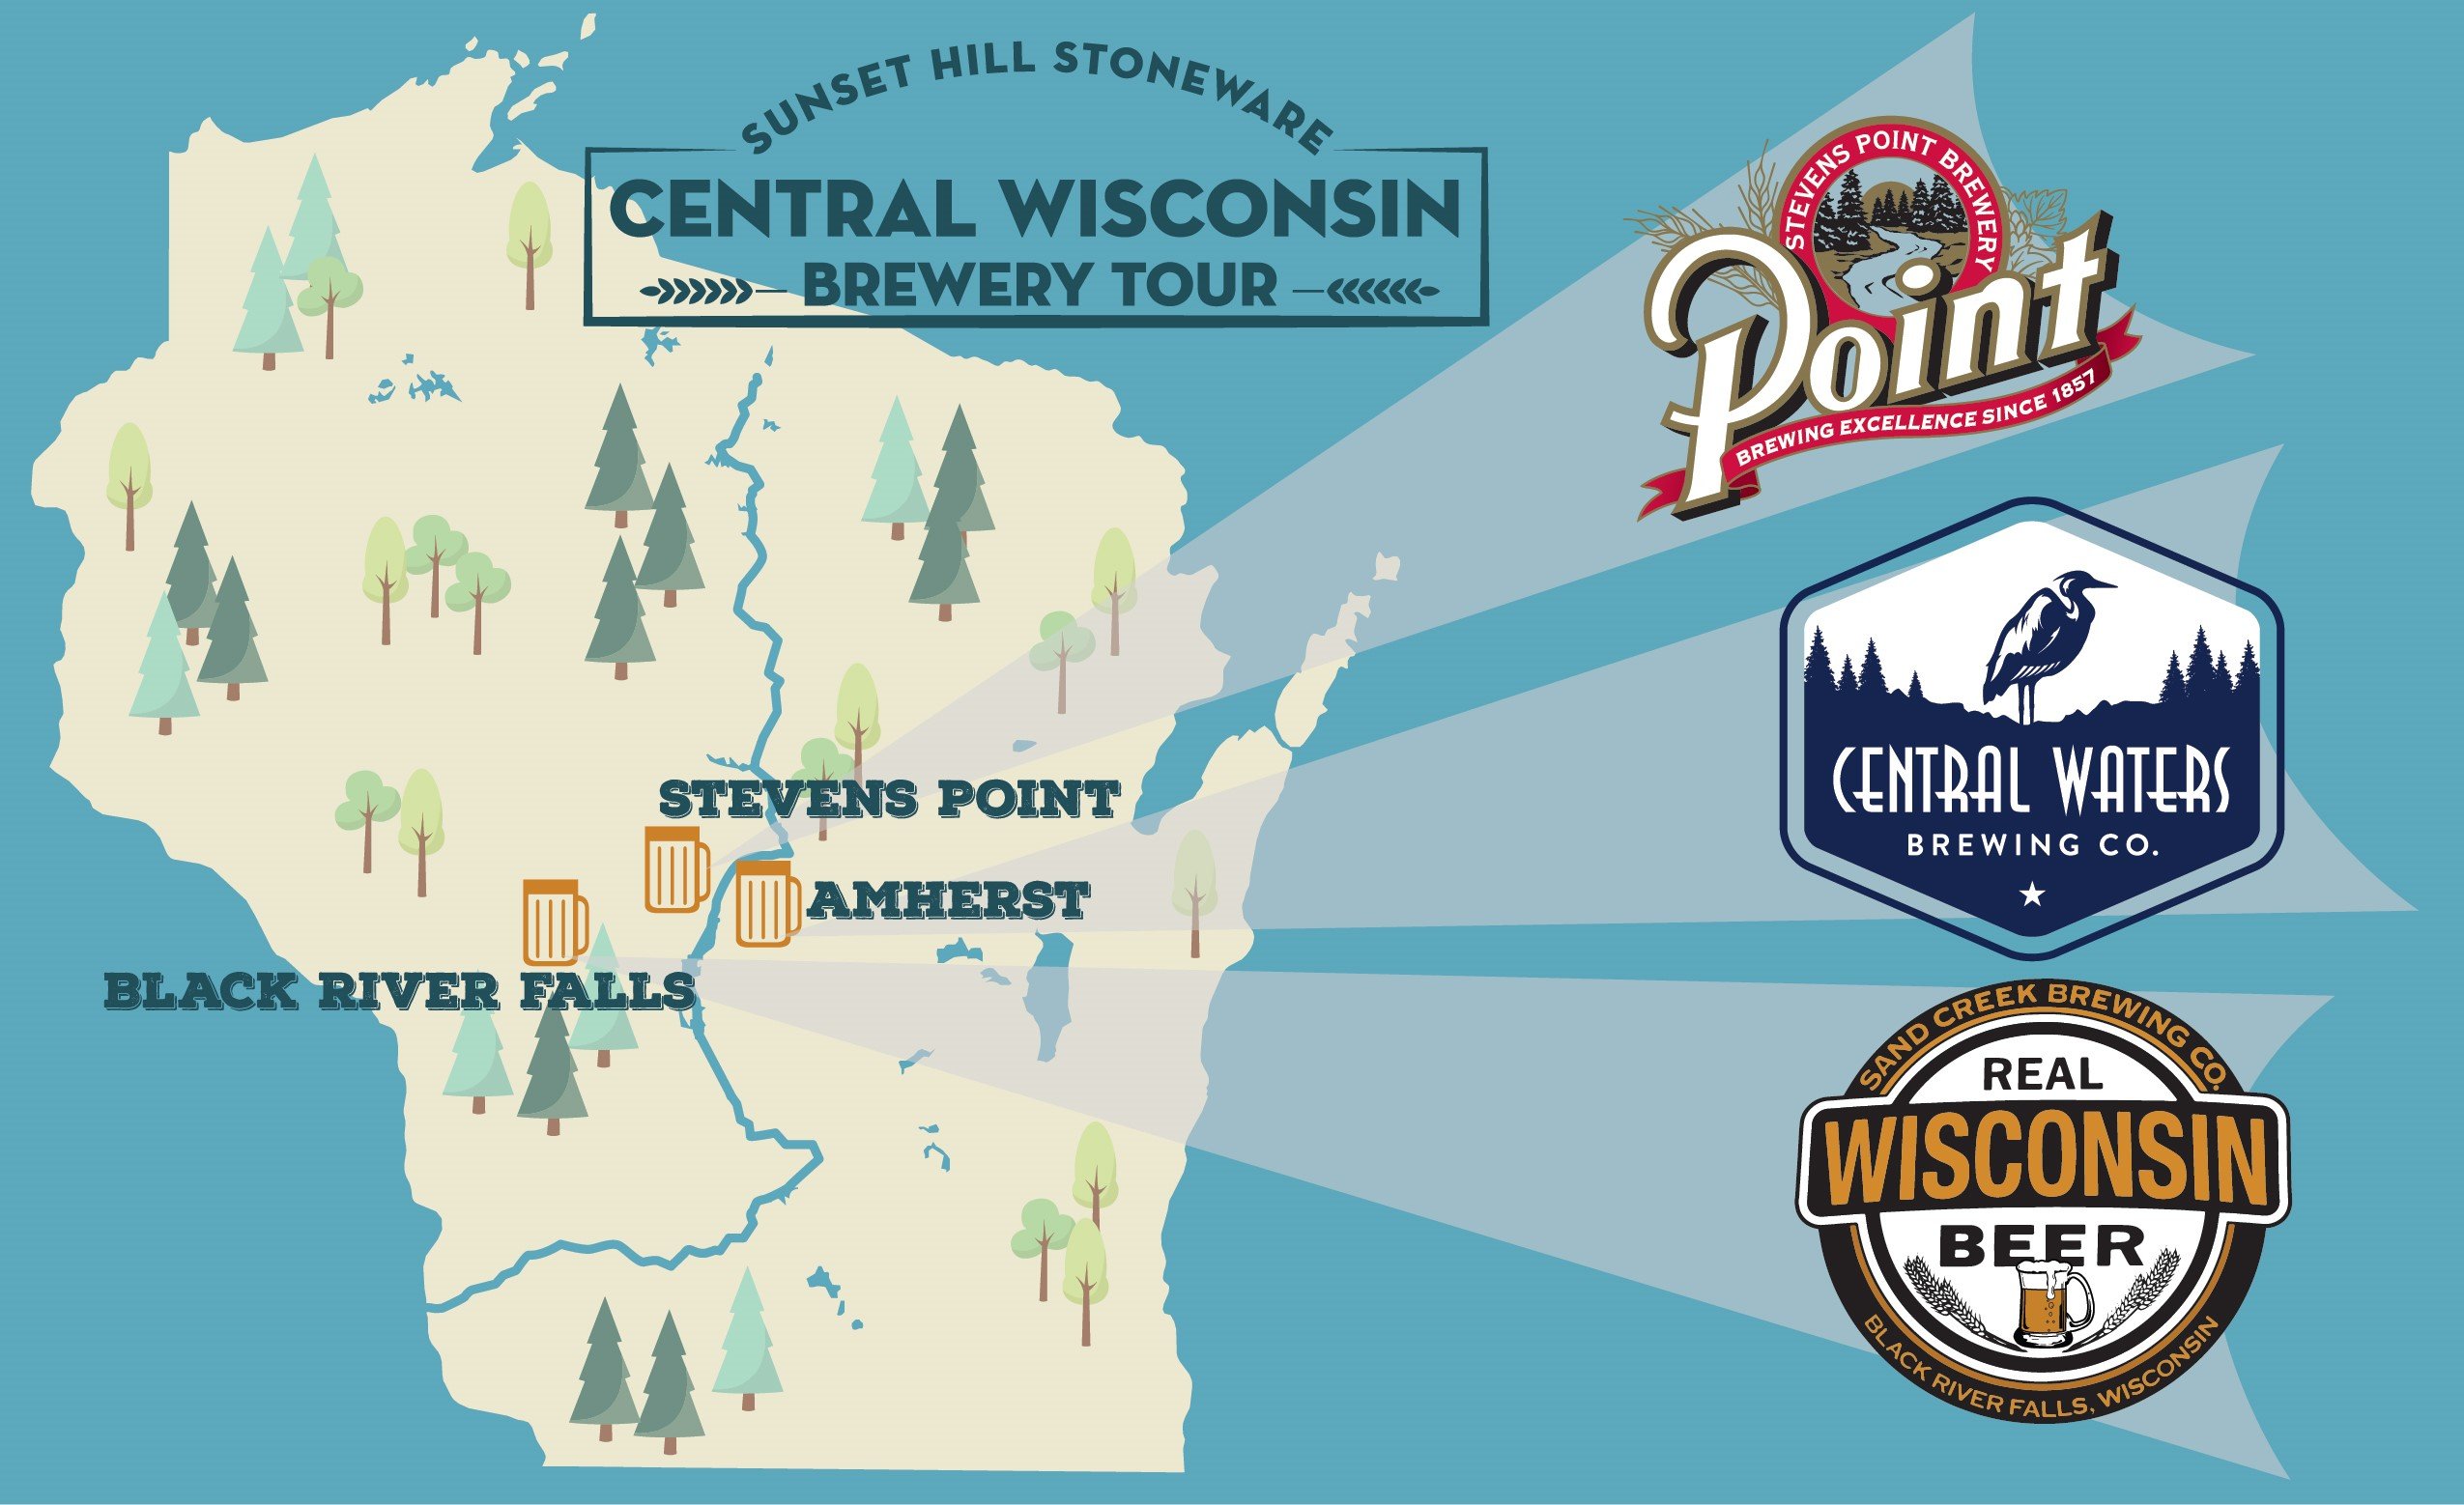 Brew Tour: Where to Find Sunset Hill Stoneware in Central Wisconsin